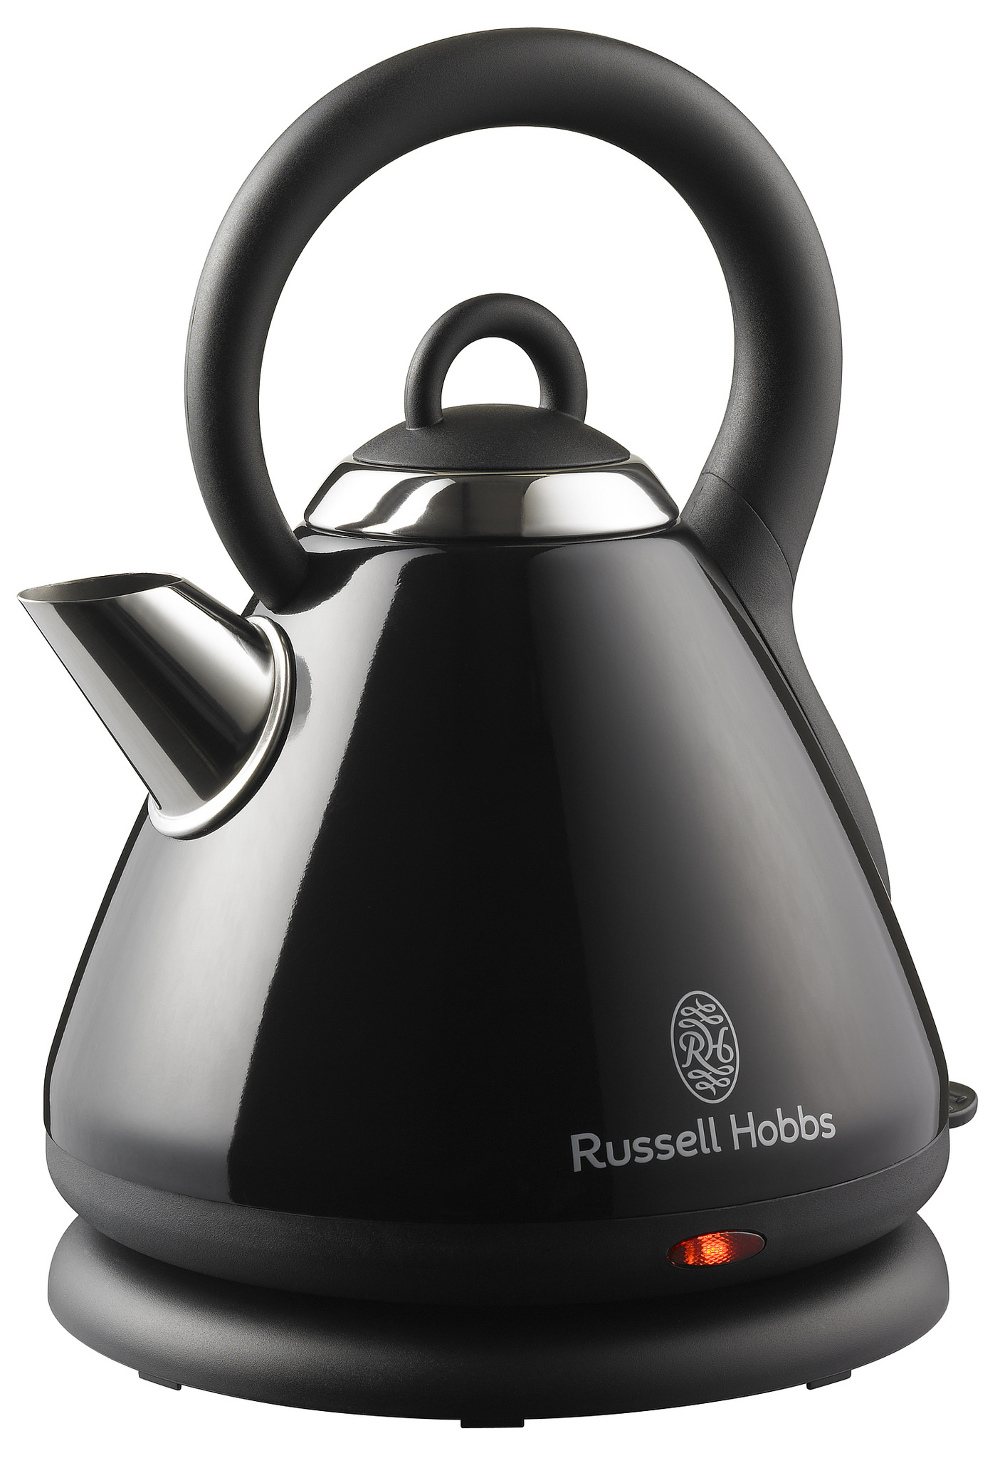 Russell Hobbs Heritage Kettle | Russell Hobbs - ラッセルホブス -